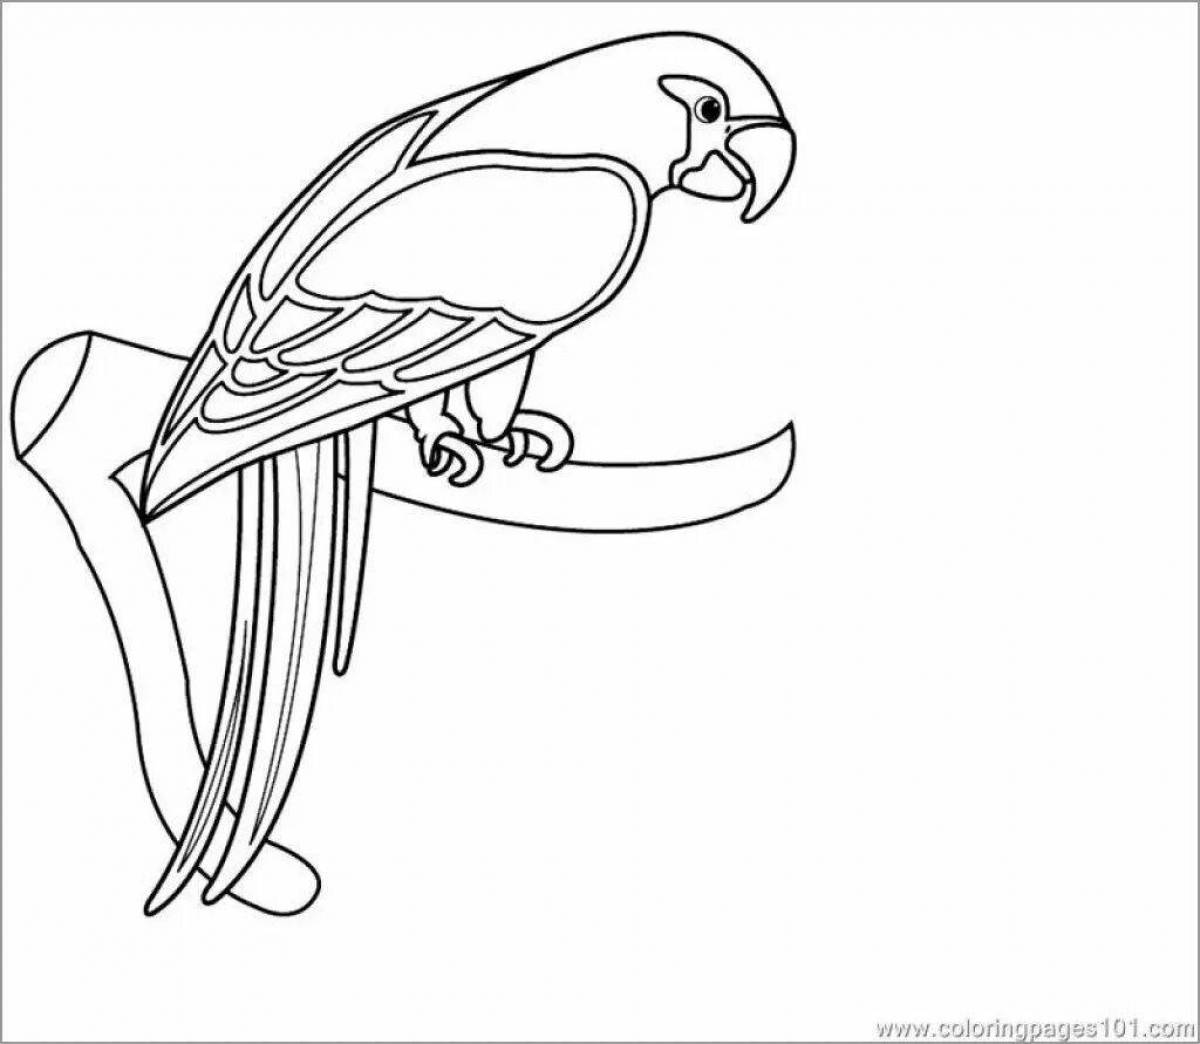 Attractive parrot coloring book for kids